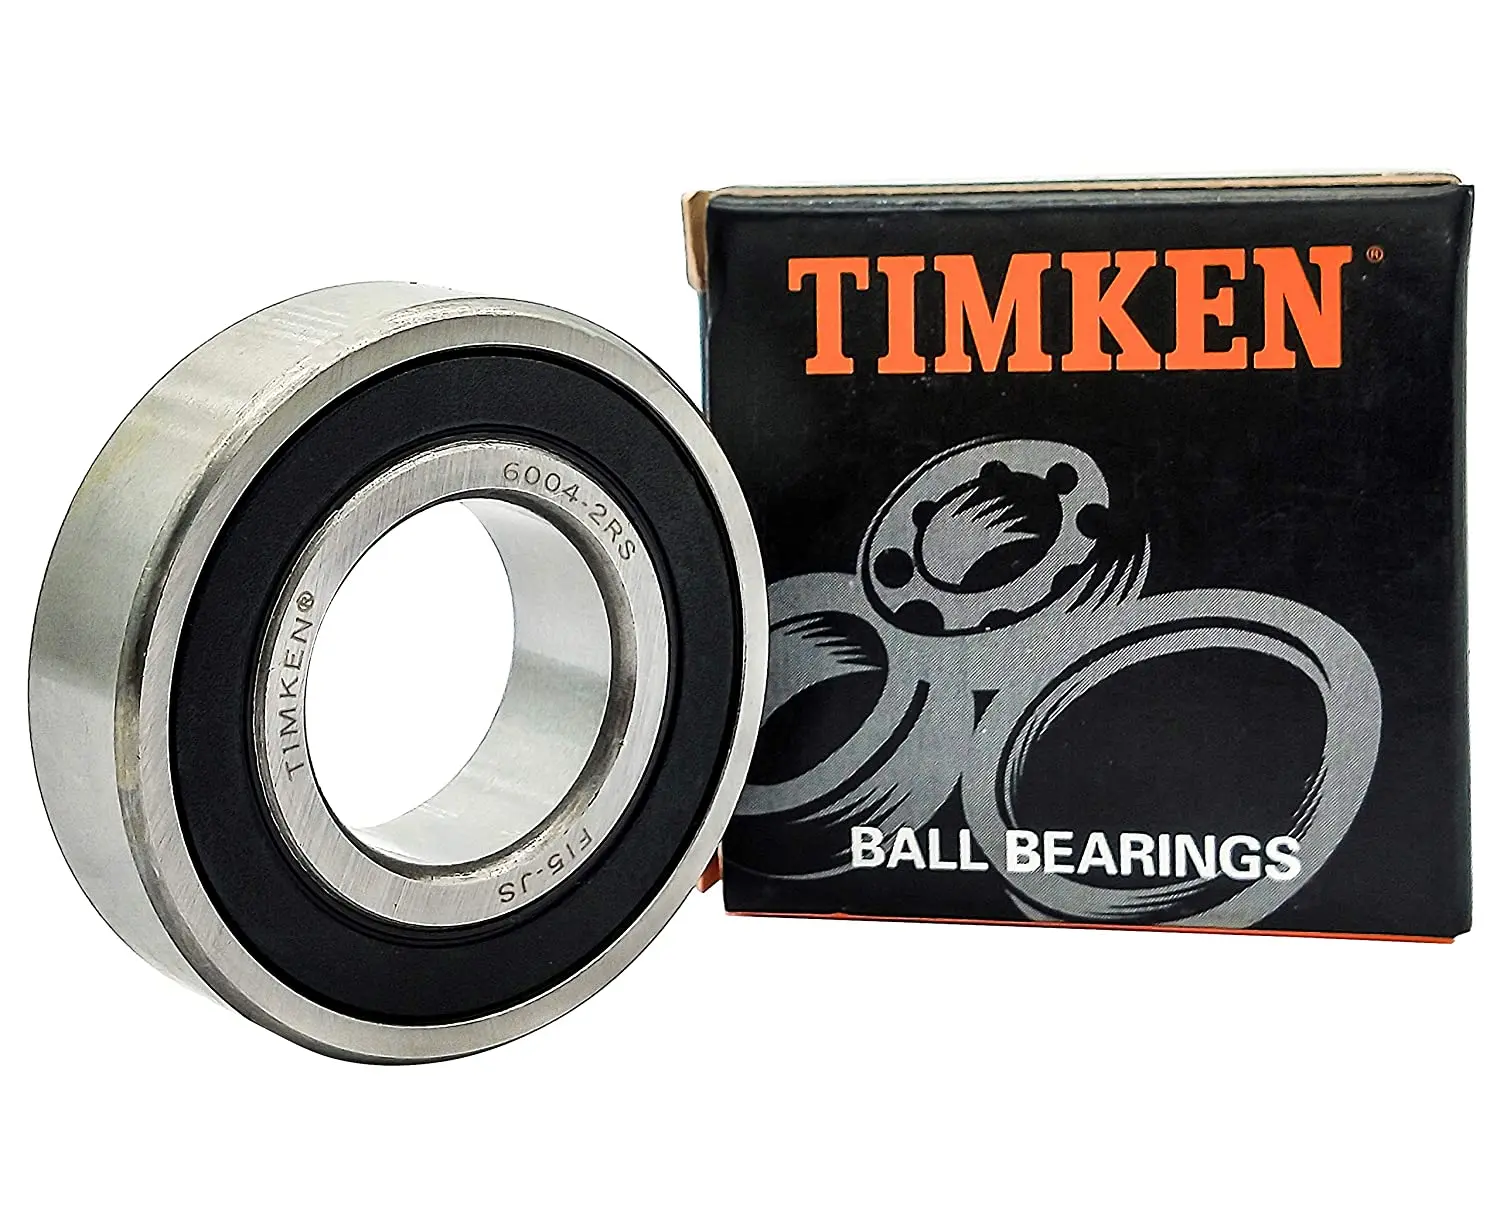 

TIMKEN 6004-2RS 4 Pcs Double Rubber Seal Bearings 20x42x12mm Pre-Lubricated Stable Cost Effective Deep Groove Ball Bearings.